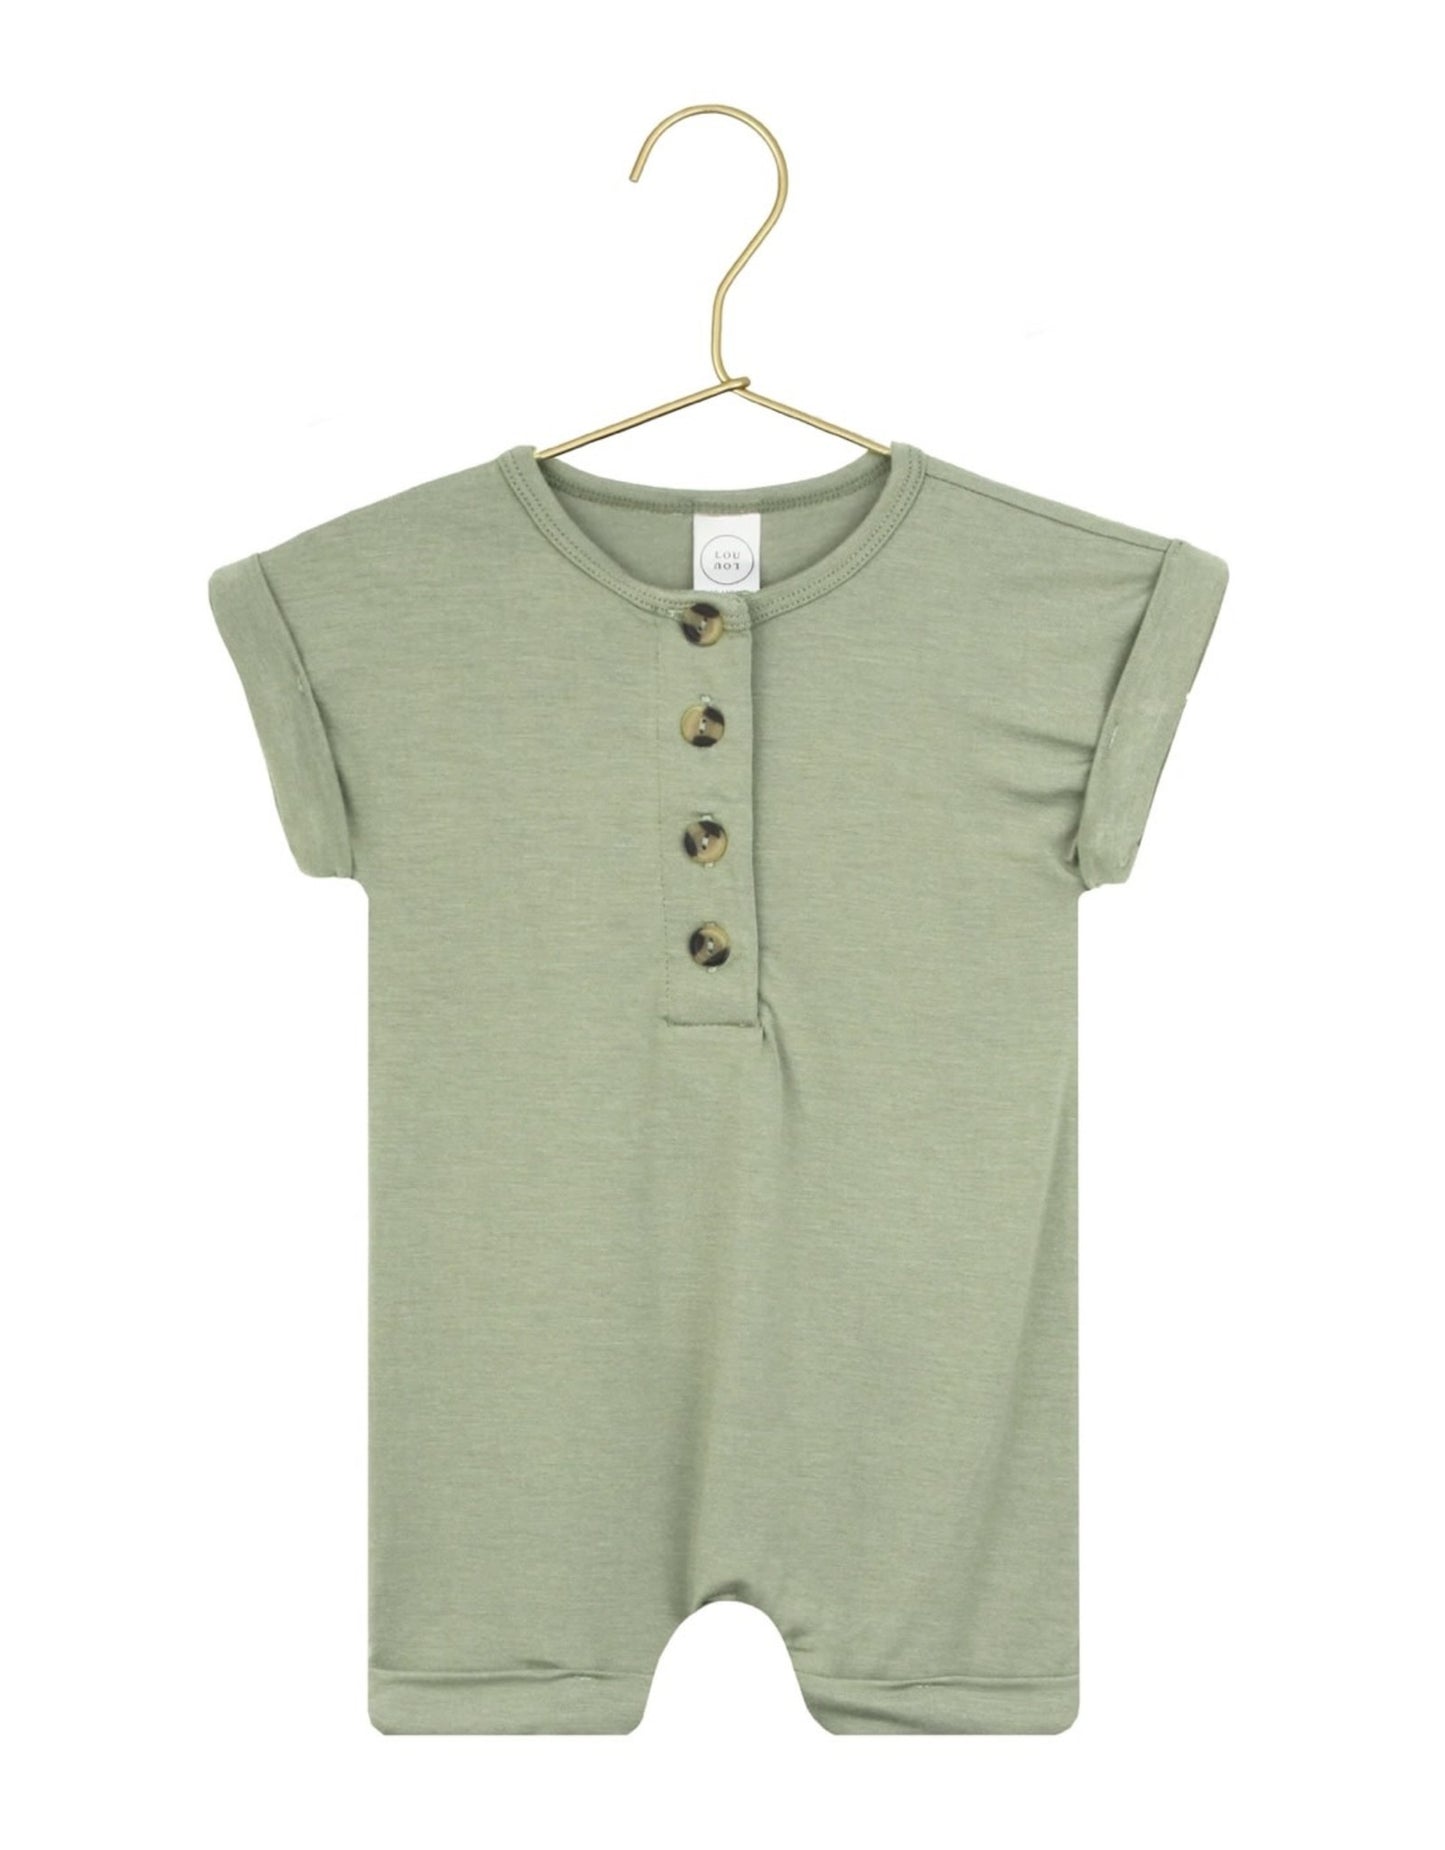 Lou Lou and Co. Marley Romper